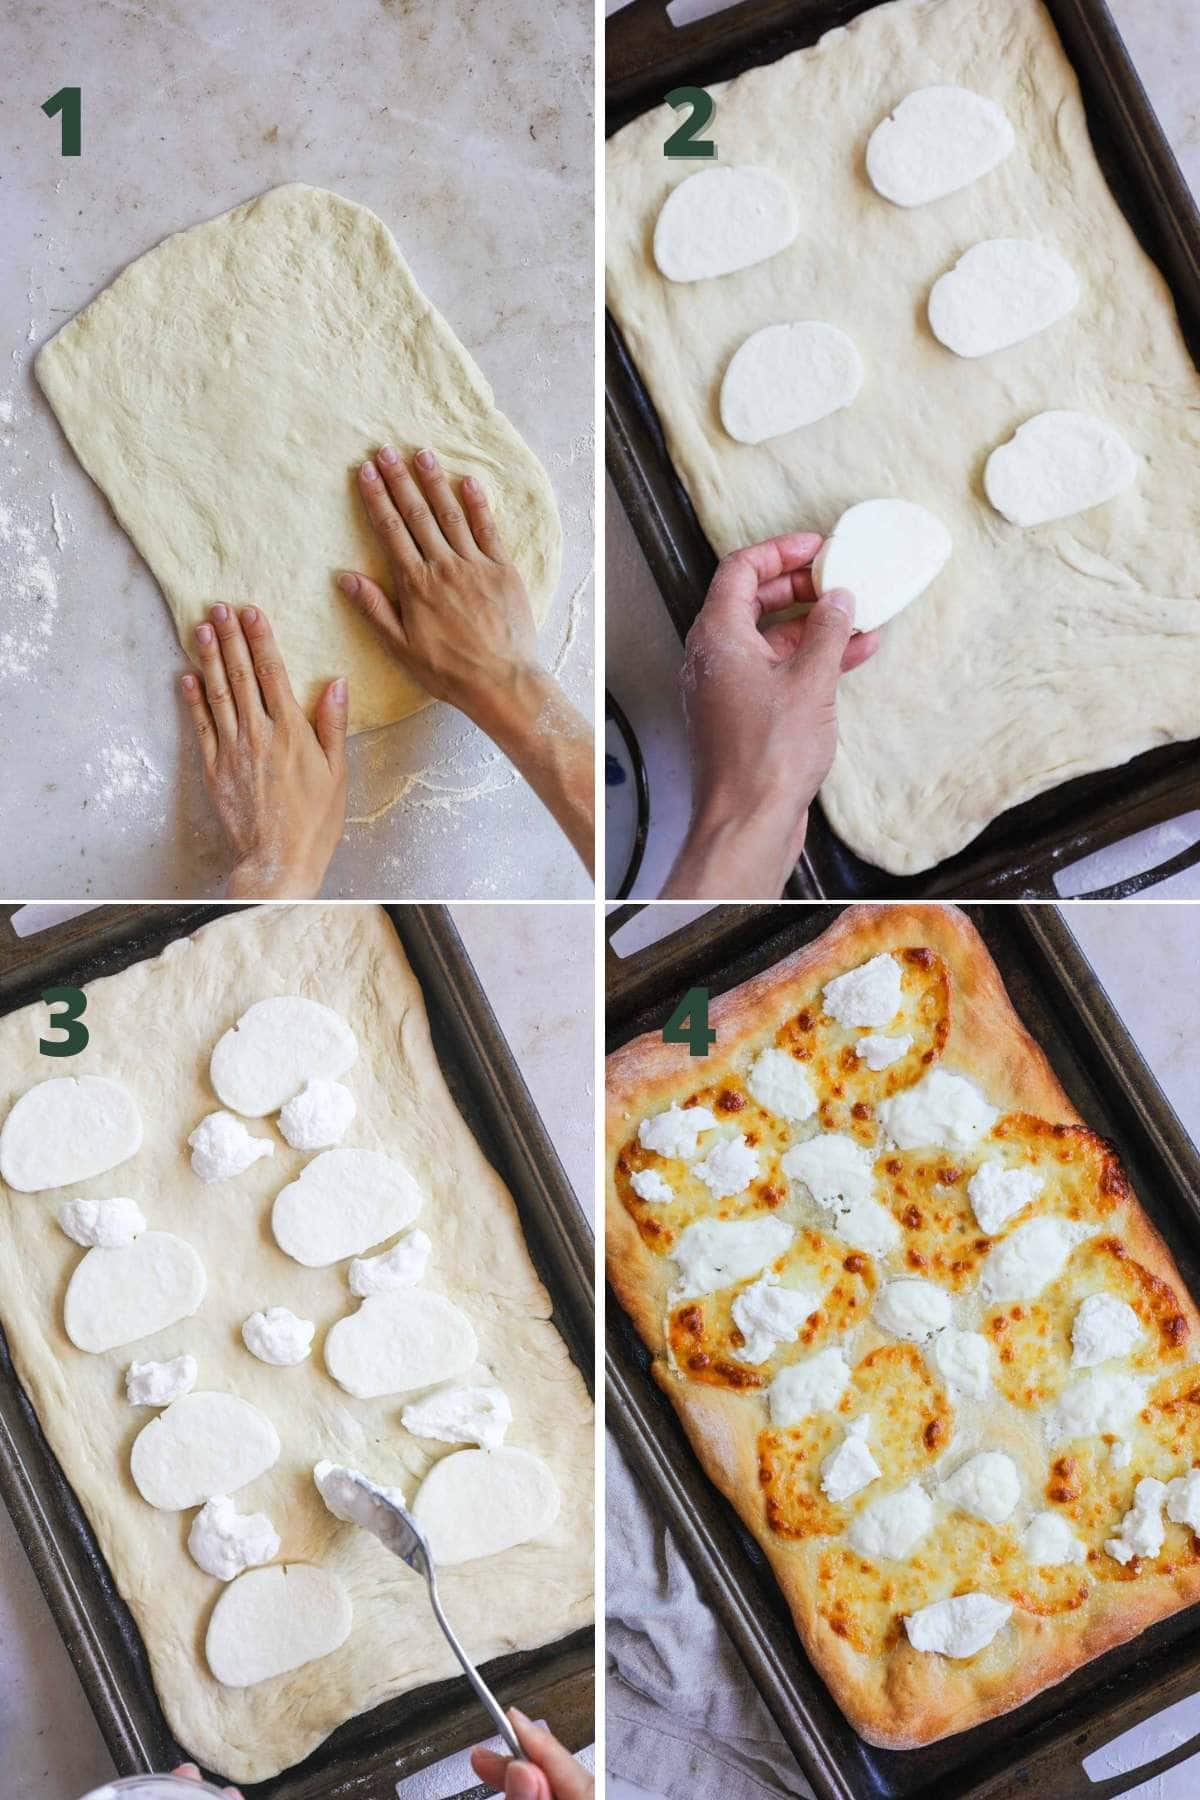 Steps to make prosciutto ricotta pizza, including rolling out the dough, adding Mozzarella and ricotta, and baking in the oven on a baking sheet.